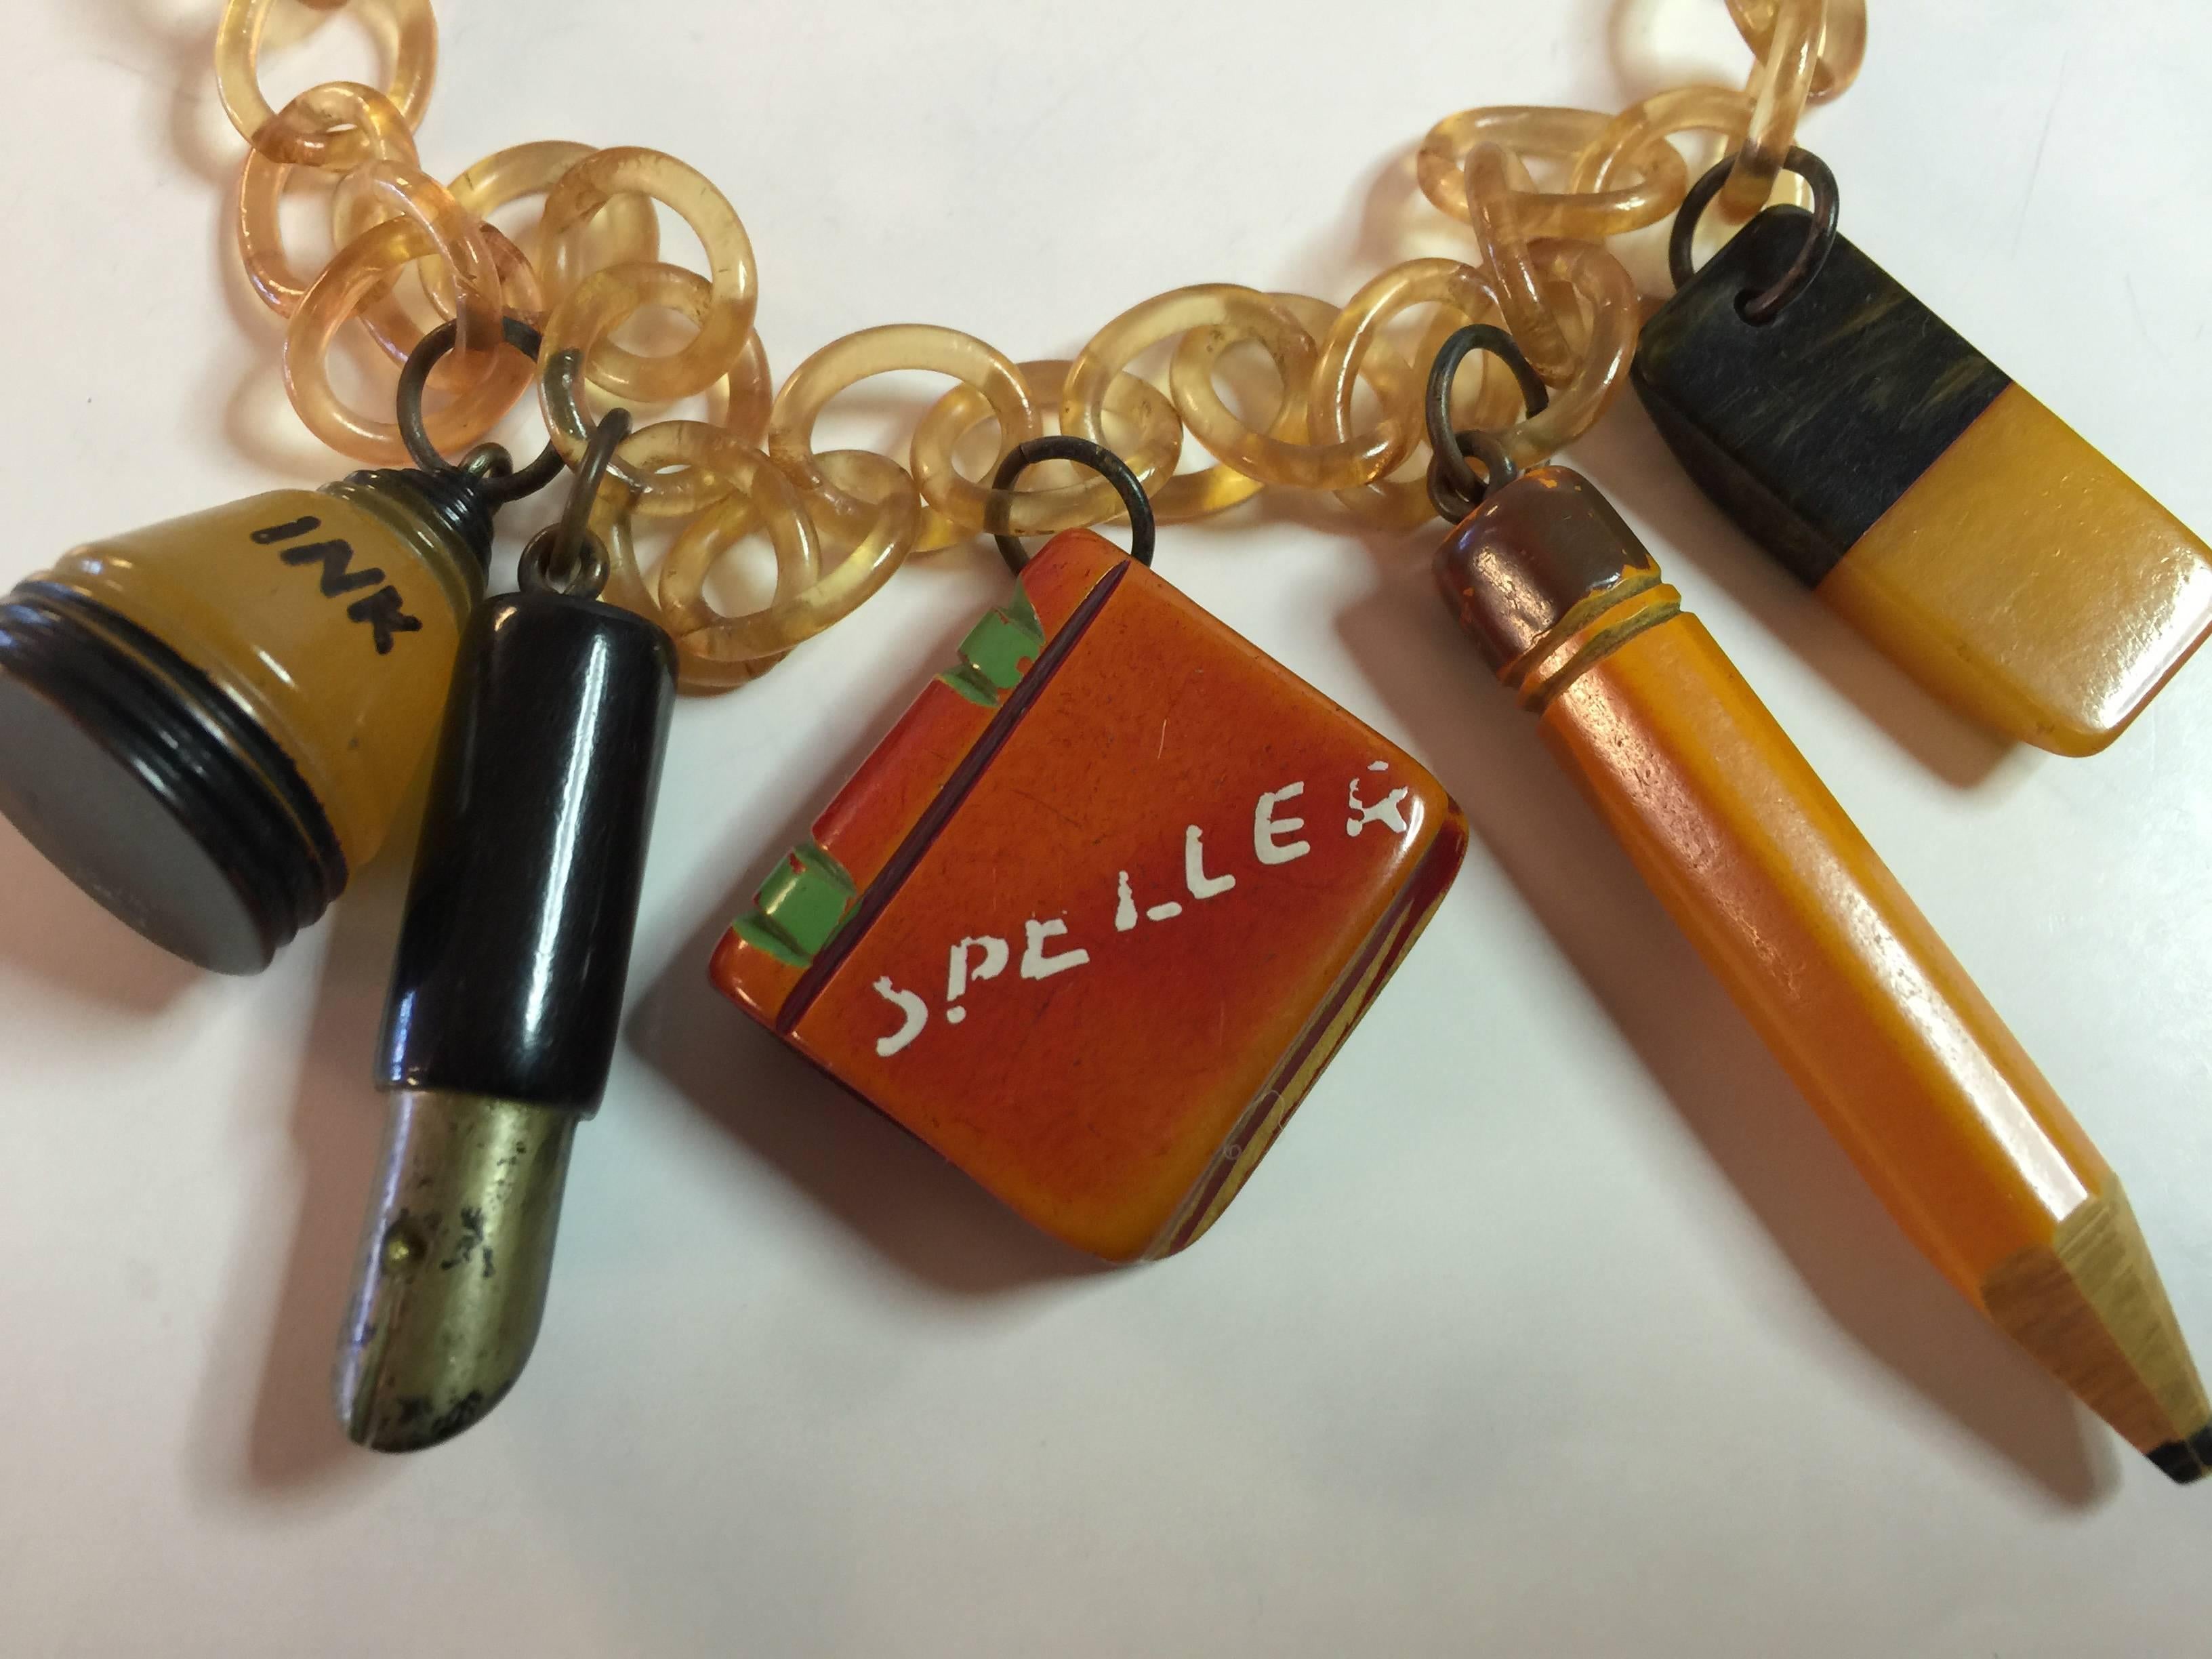 Figural Schooldays Jewelry is highly sought after in the bakelite world A classic necklace comprised of 5 charms suspended by brass or rings from translucent cellulose chain. An ink bottle, old fashioned fountain pen with brass nib, resin washed